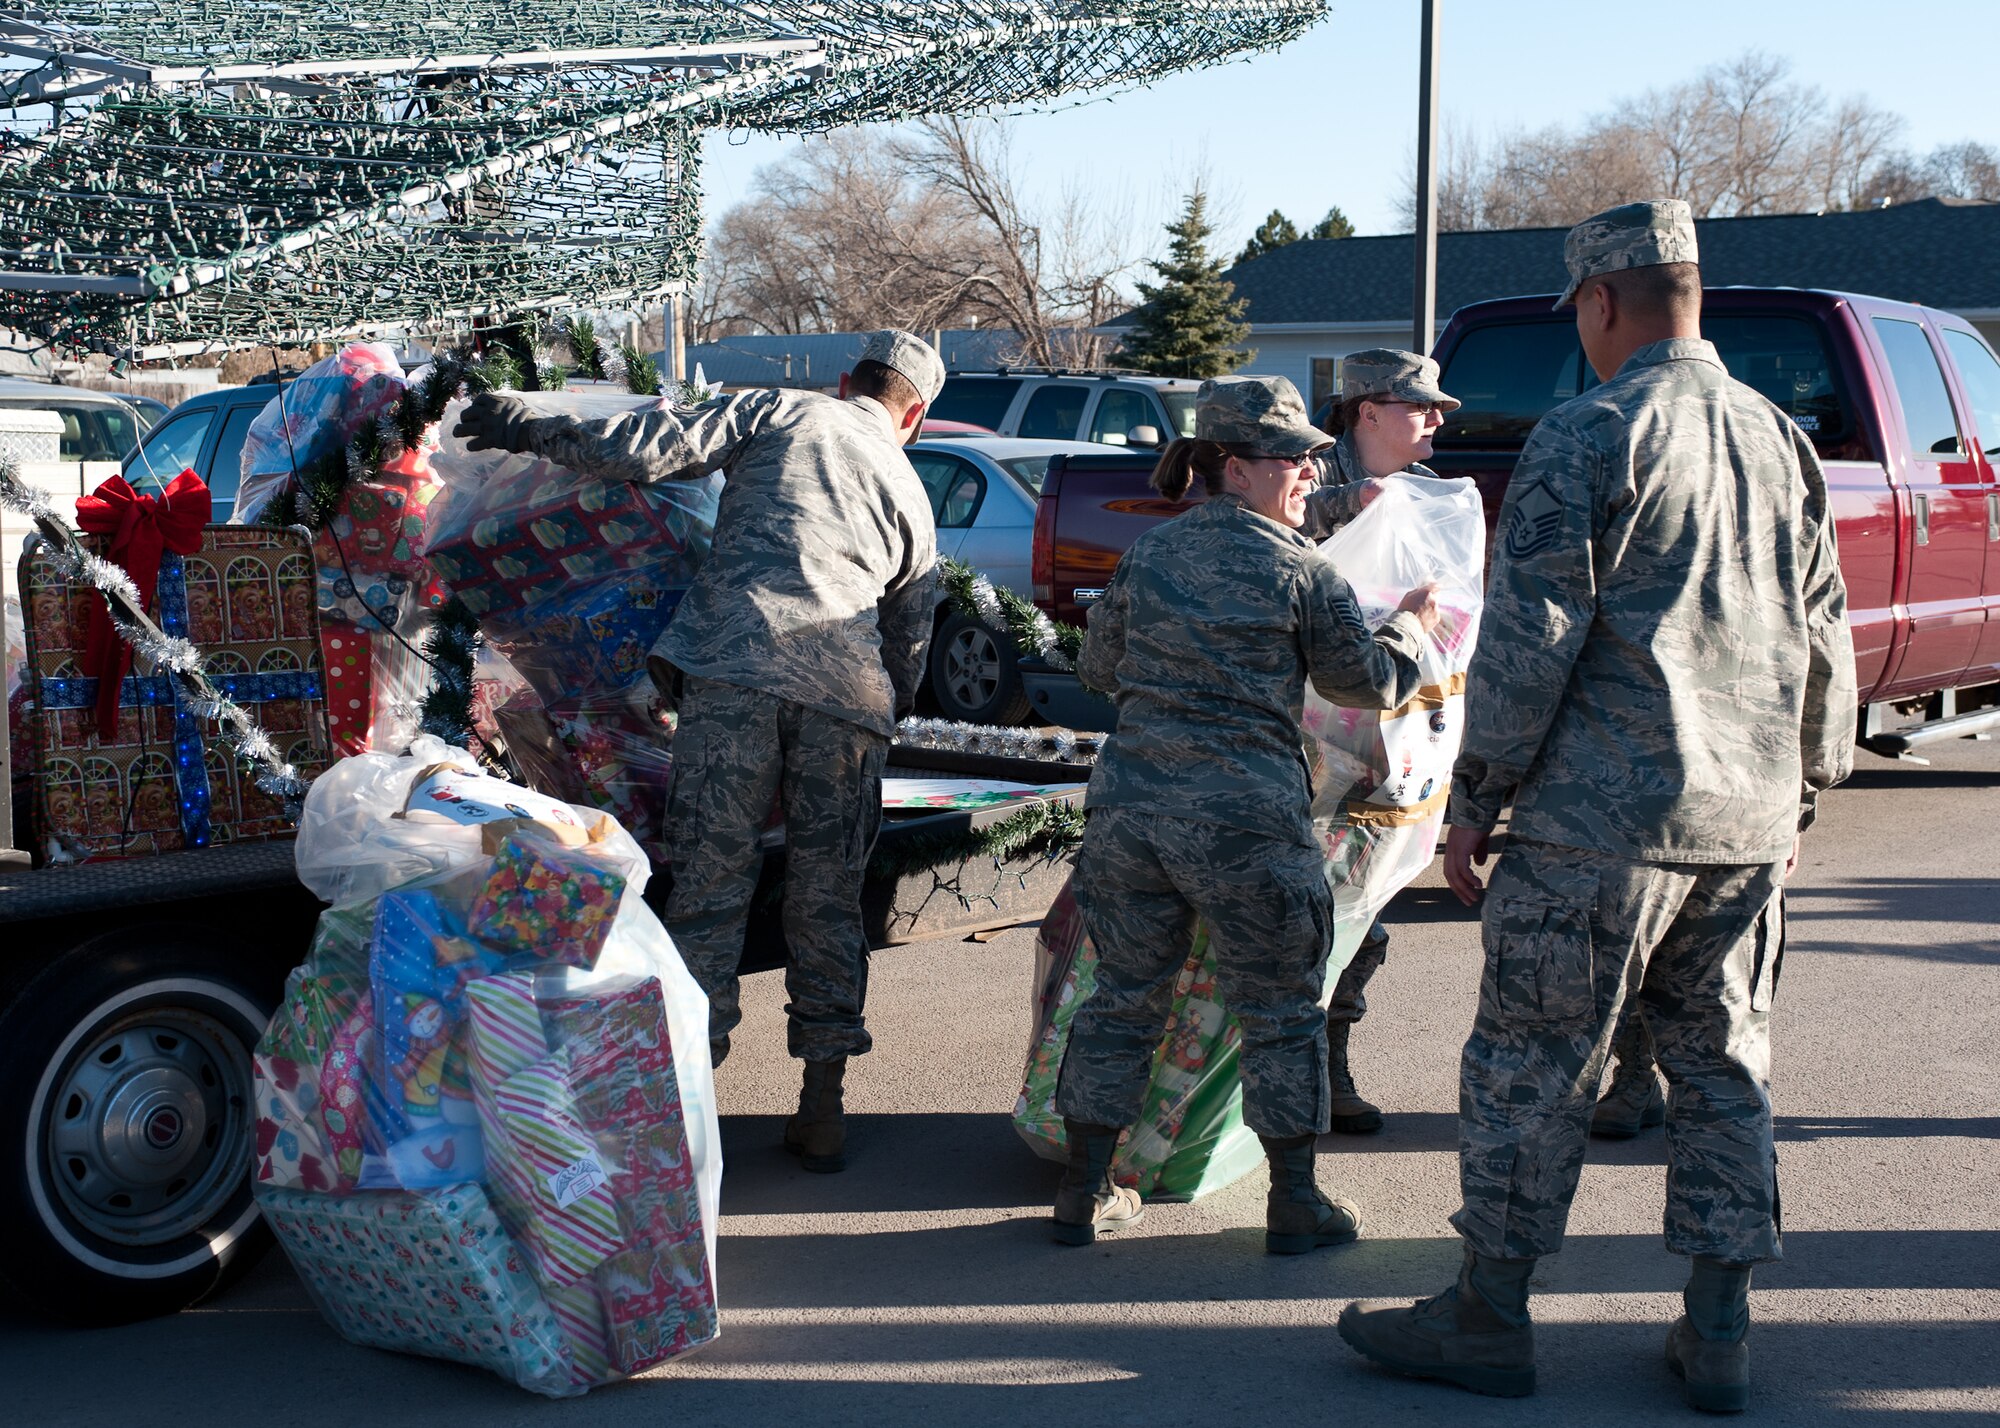 Volunteers from Ellsworth Air Force Base, S.D. unload more than 180 presents from Santa's sleigh to take into the classrooms at the Youth & Family Services Child Care program in Rapid City, S.D., Dec. 15, 2011. This is the fifth year the 28th Operations Group has conducted an Angel Tree program. (U.S. Air Force photo by Airman Alystria Maurer/Released)